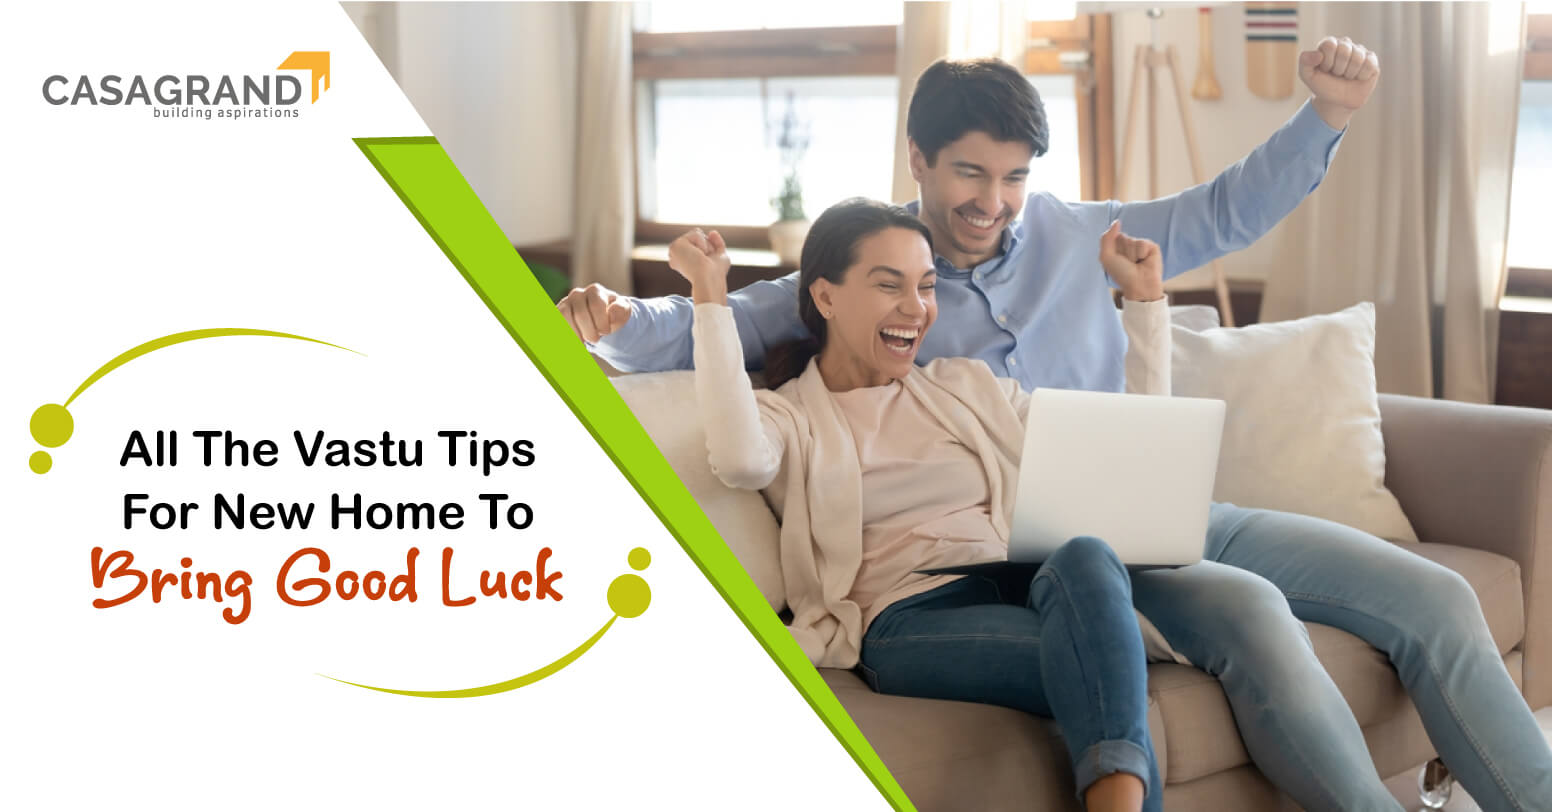 All The Vastu Tips For New Home To Bring Good Luck